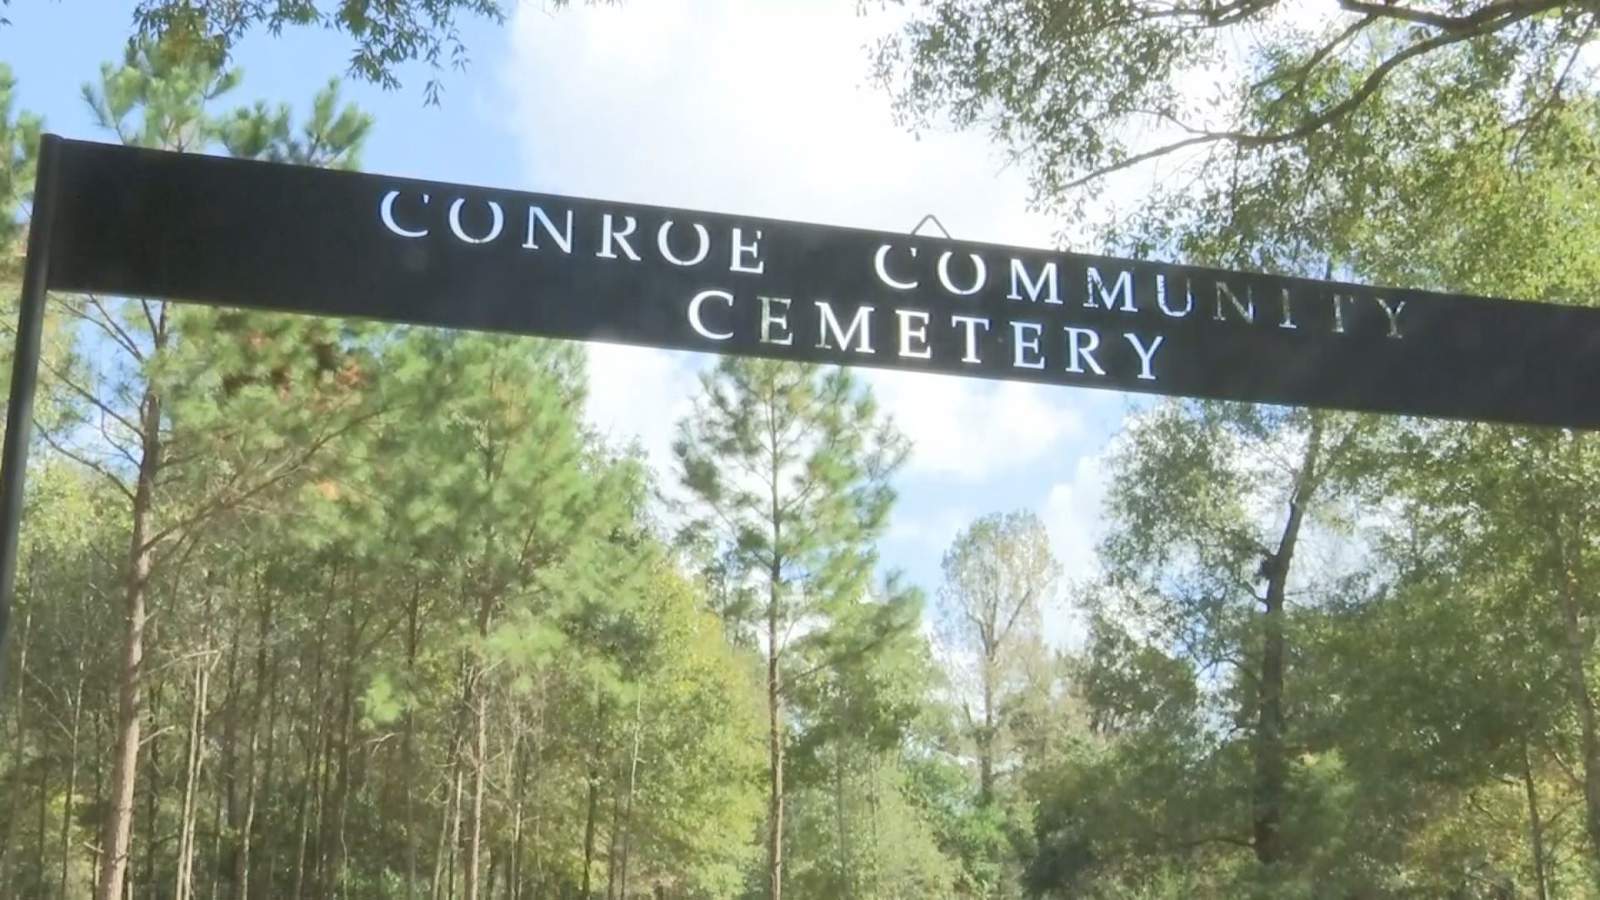 Historic African American cemetery restored in Conroe after 128 years